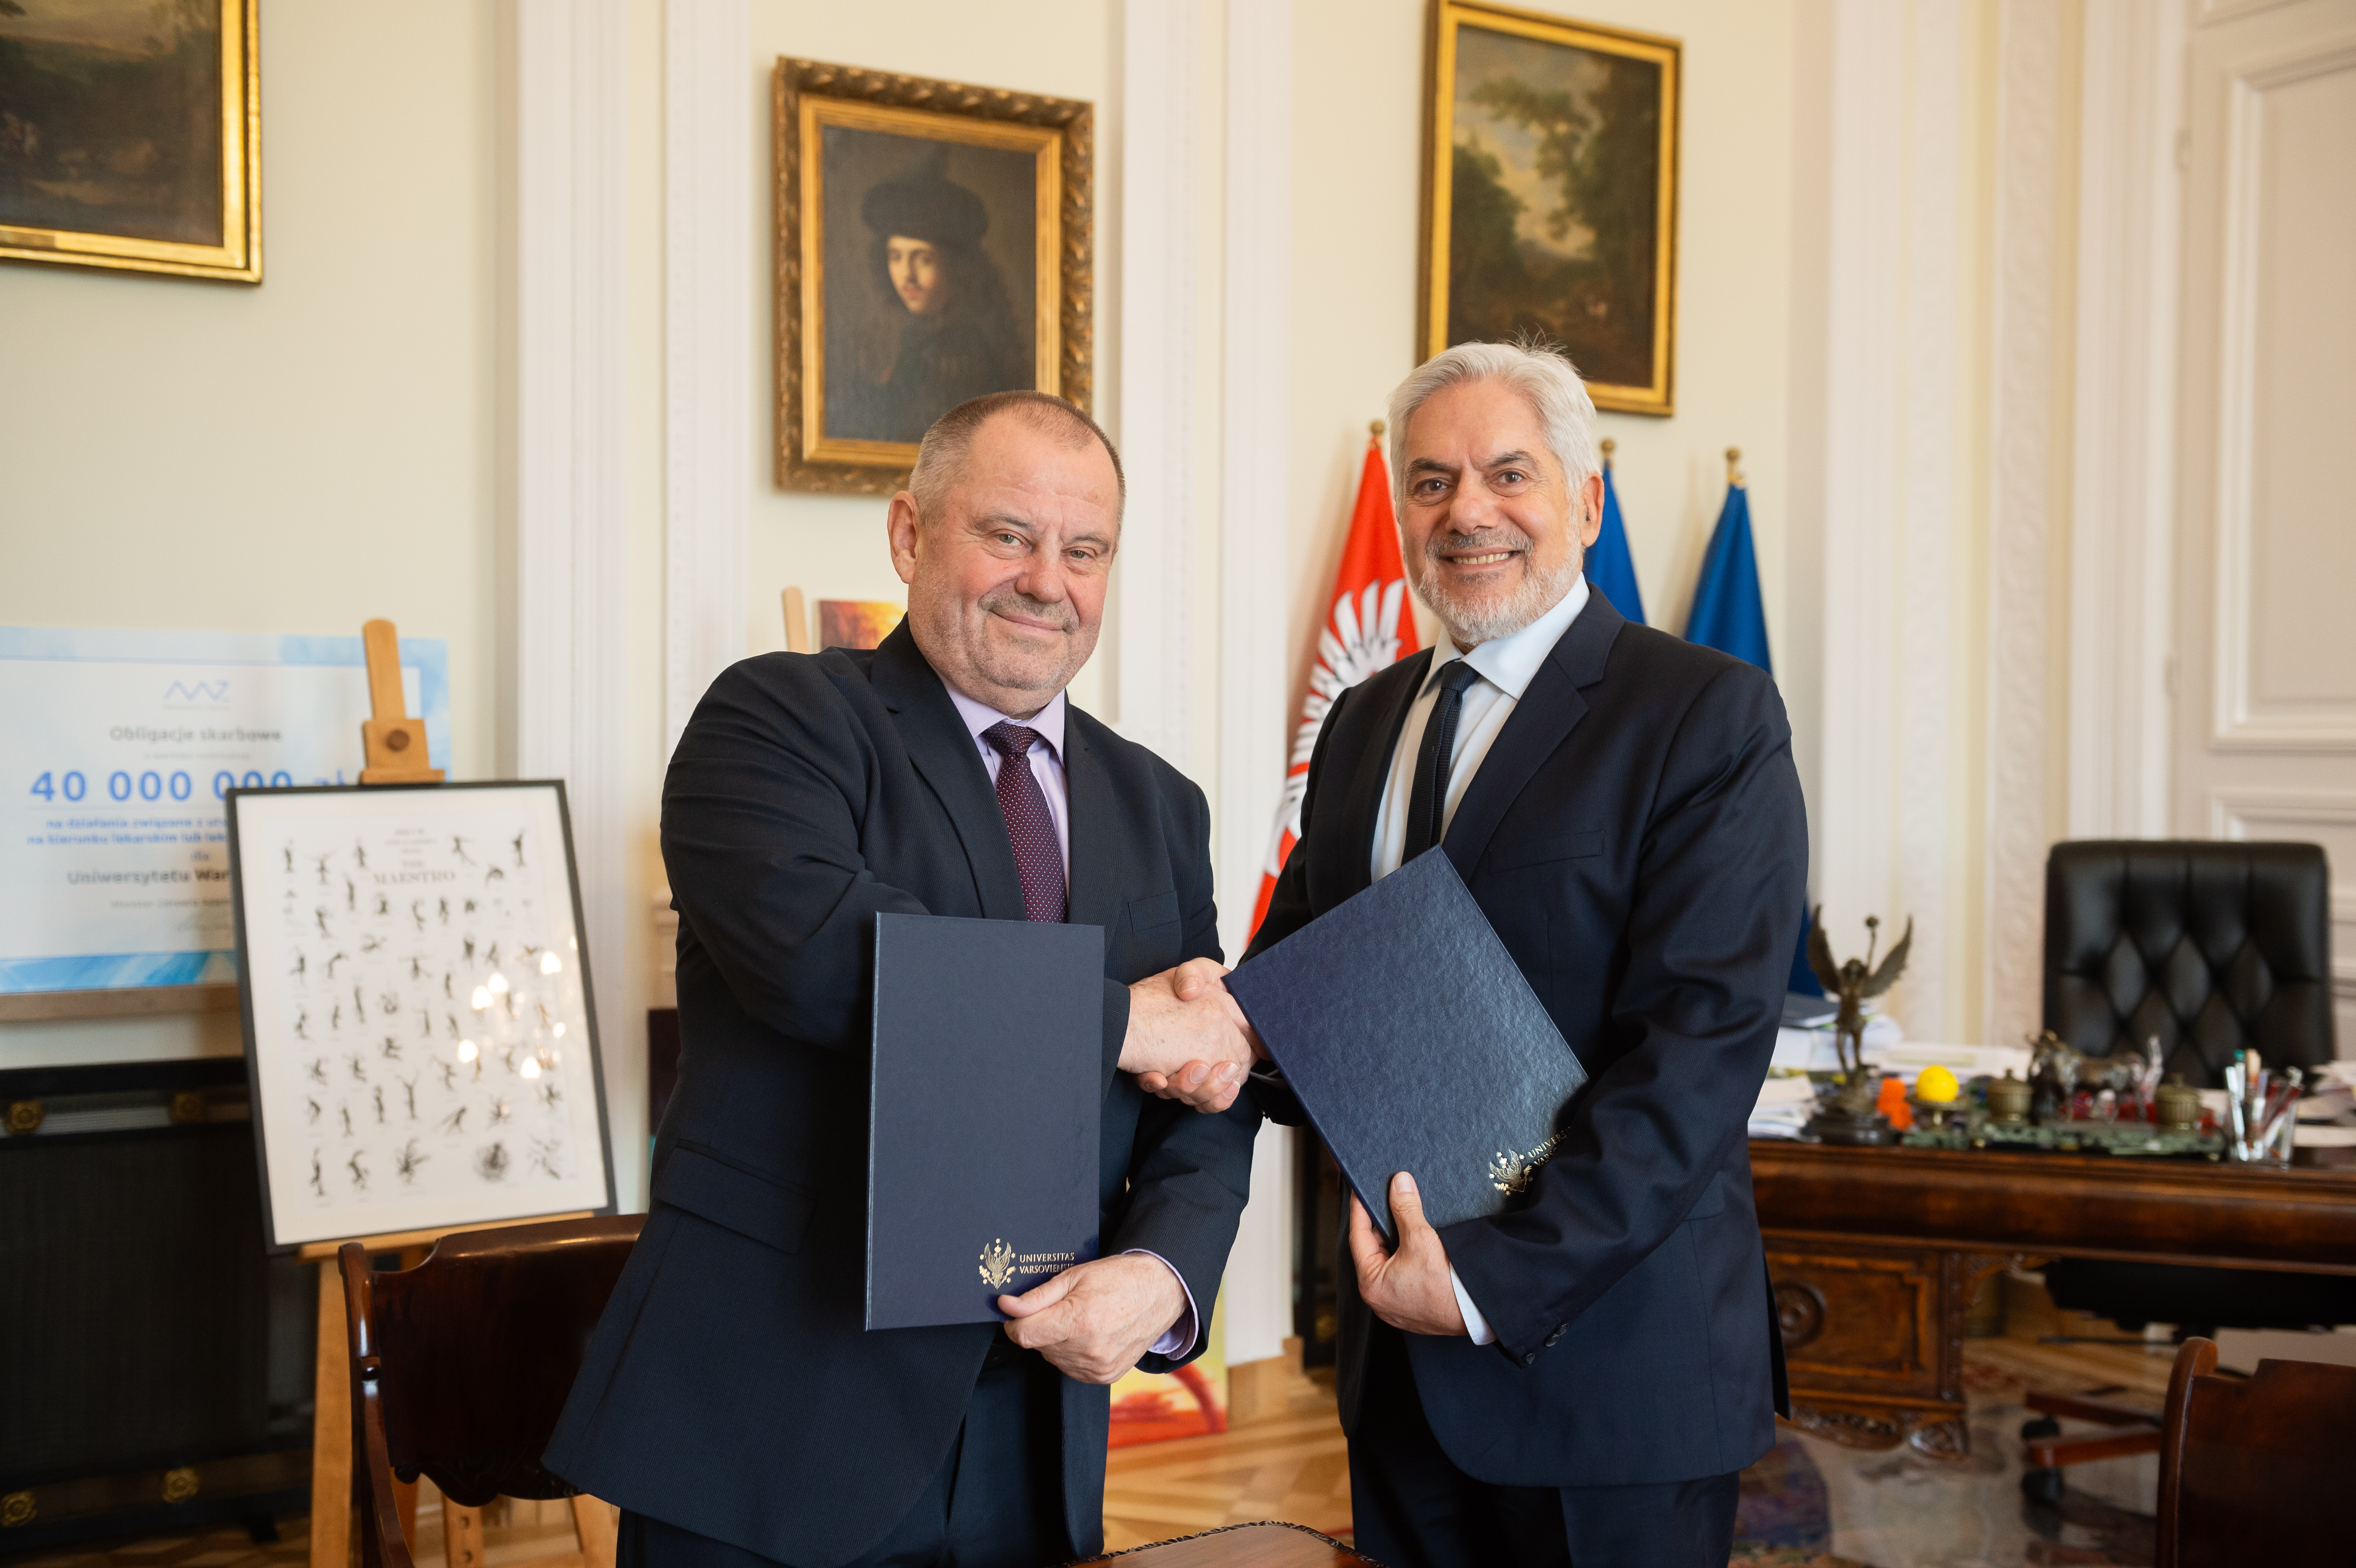 Open University of Cyprus and University of Warsaw forge a new strategic partnership